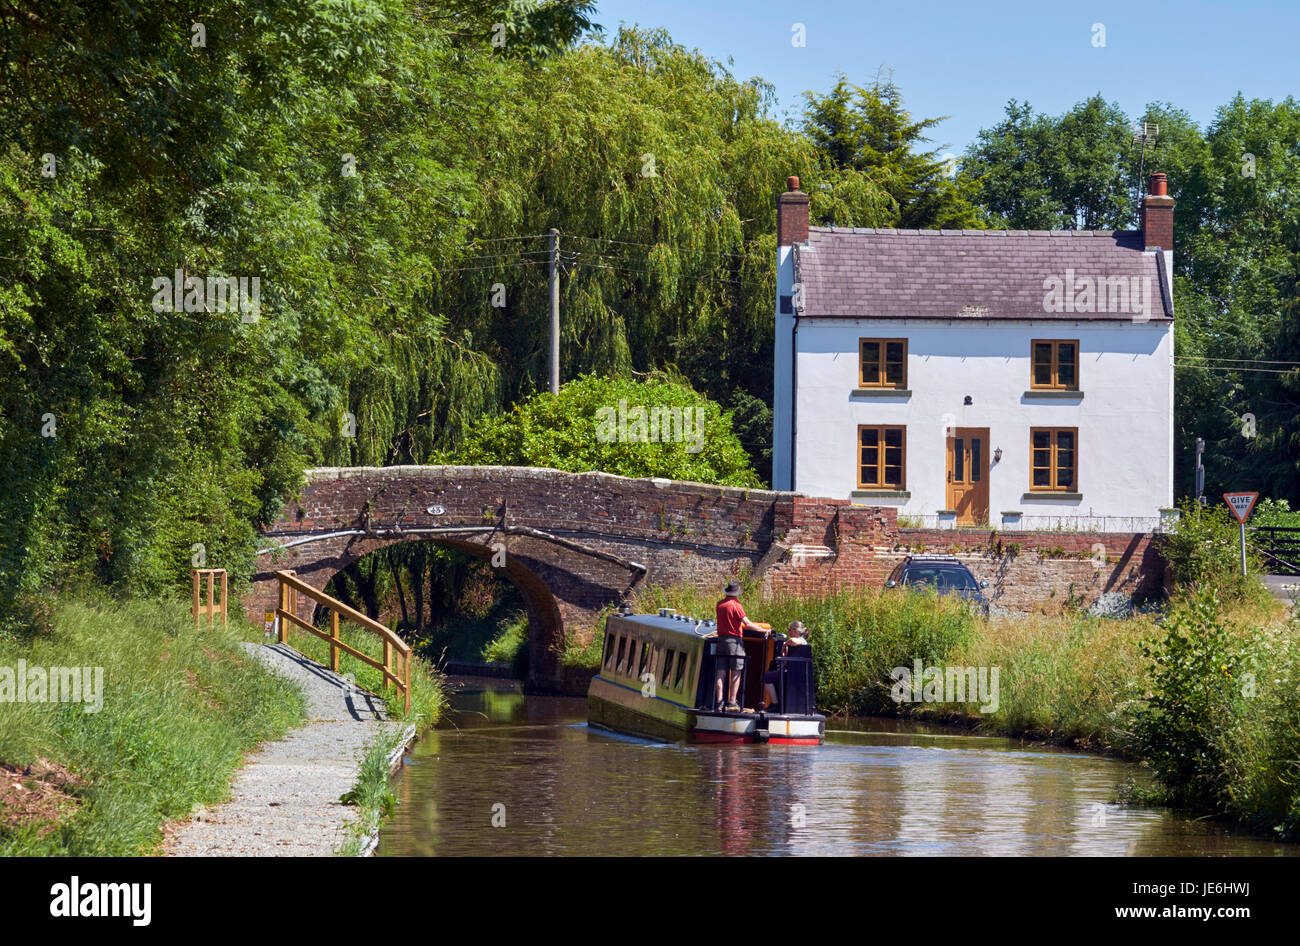 Boat on the Langollen Canal near Whixall, Shropshire, England. Stock Photo